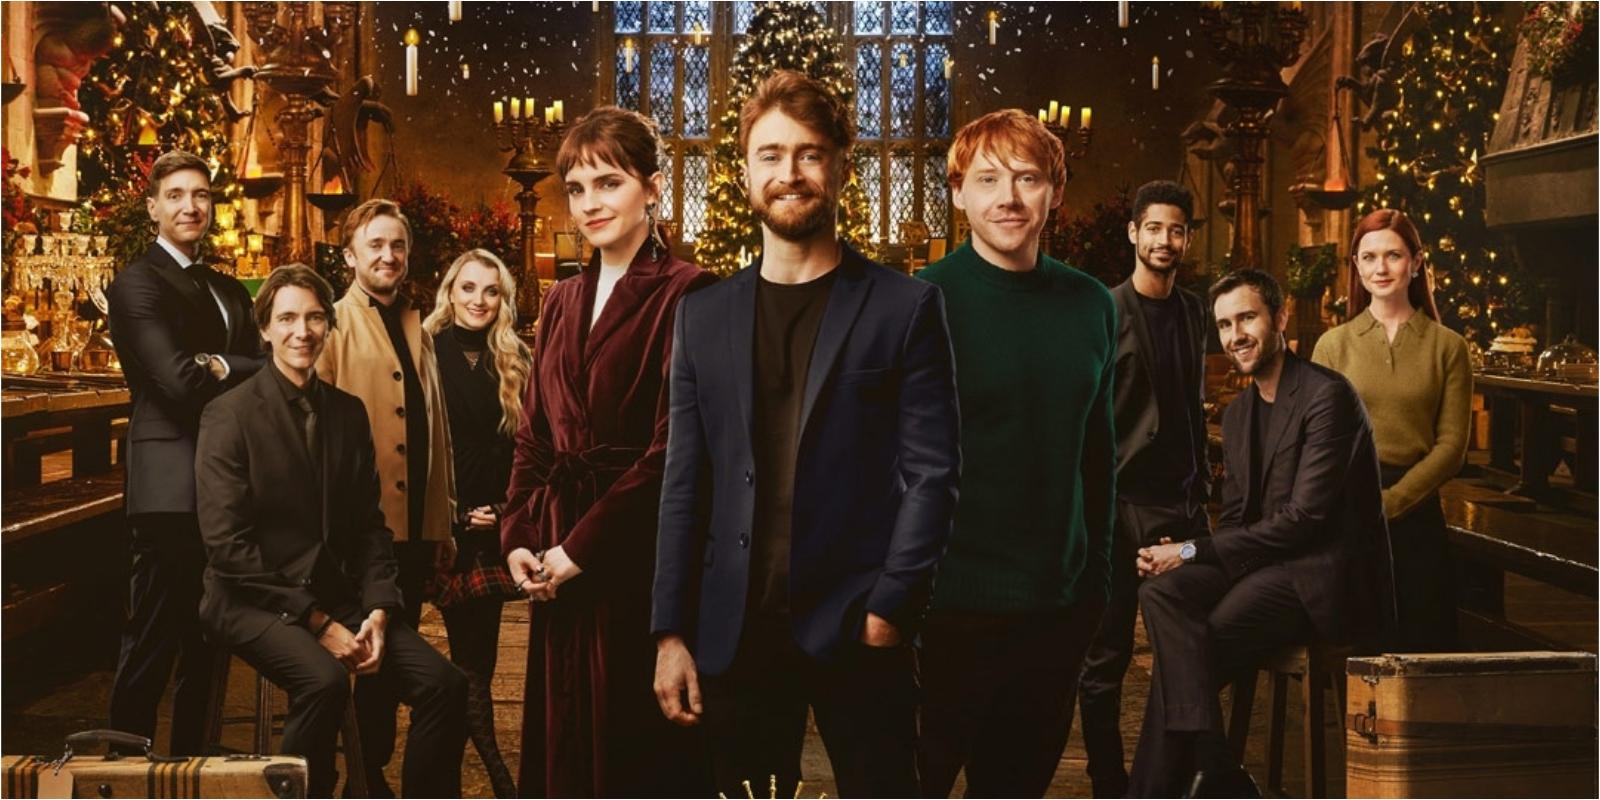 'Harry Potter' cast members pose in the HBO Max special 'Return to Hogwarts'